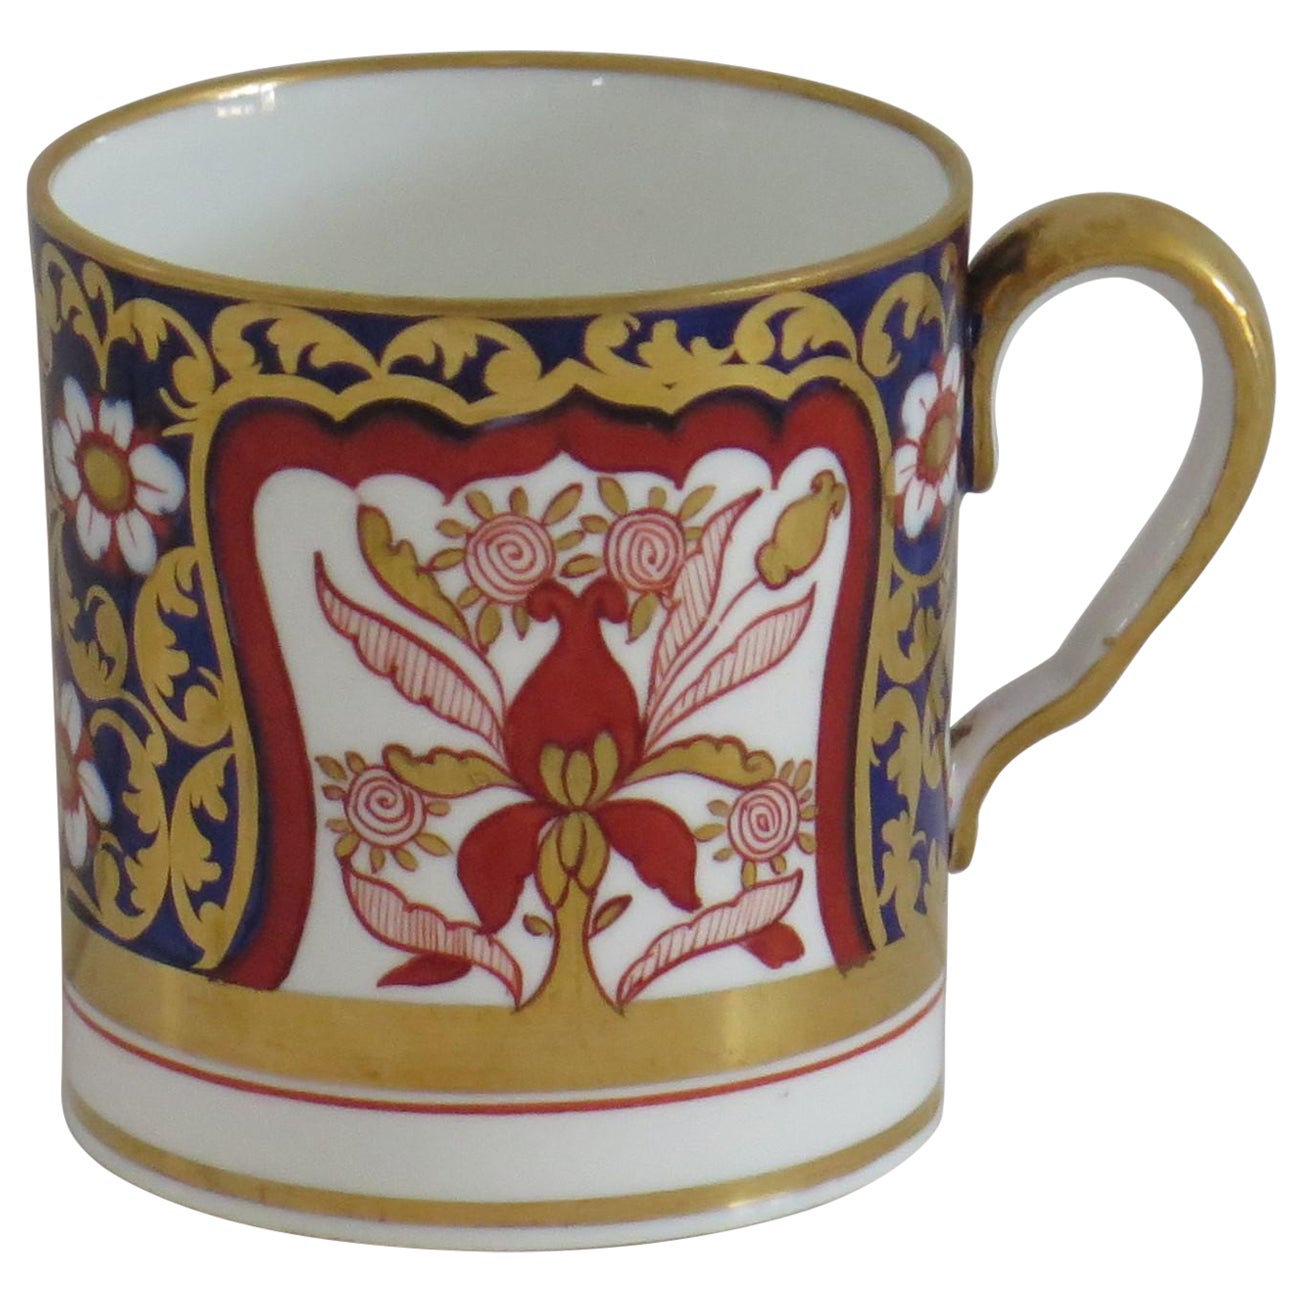 Copeland 'Spode' Porcelain Coffee Can Finely Hand Painted & Gilded, circa 1860